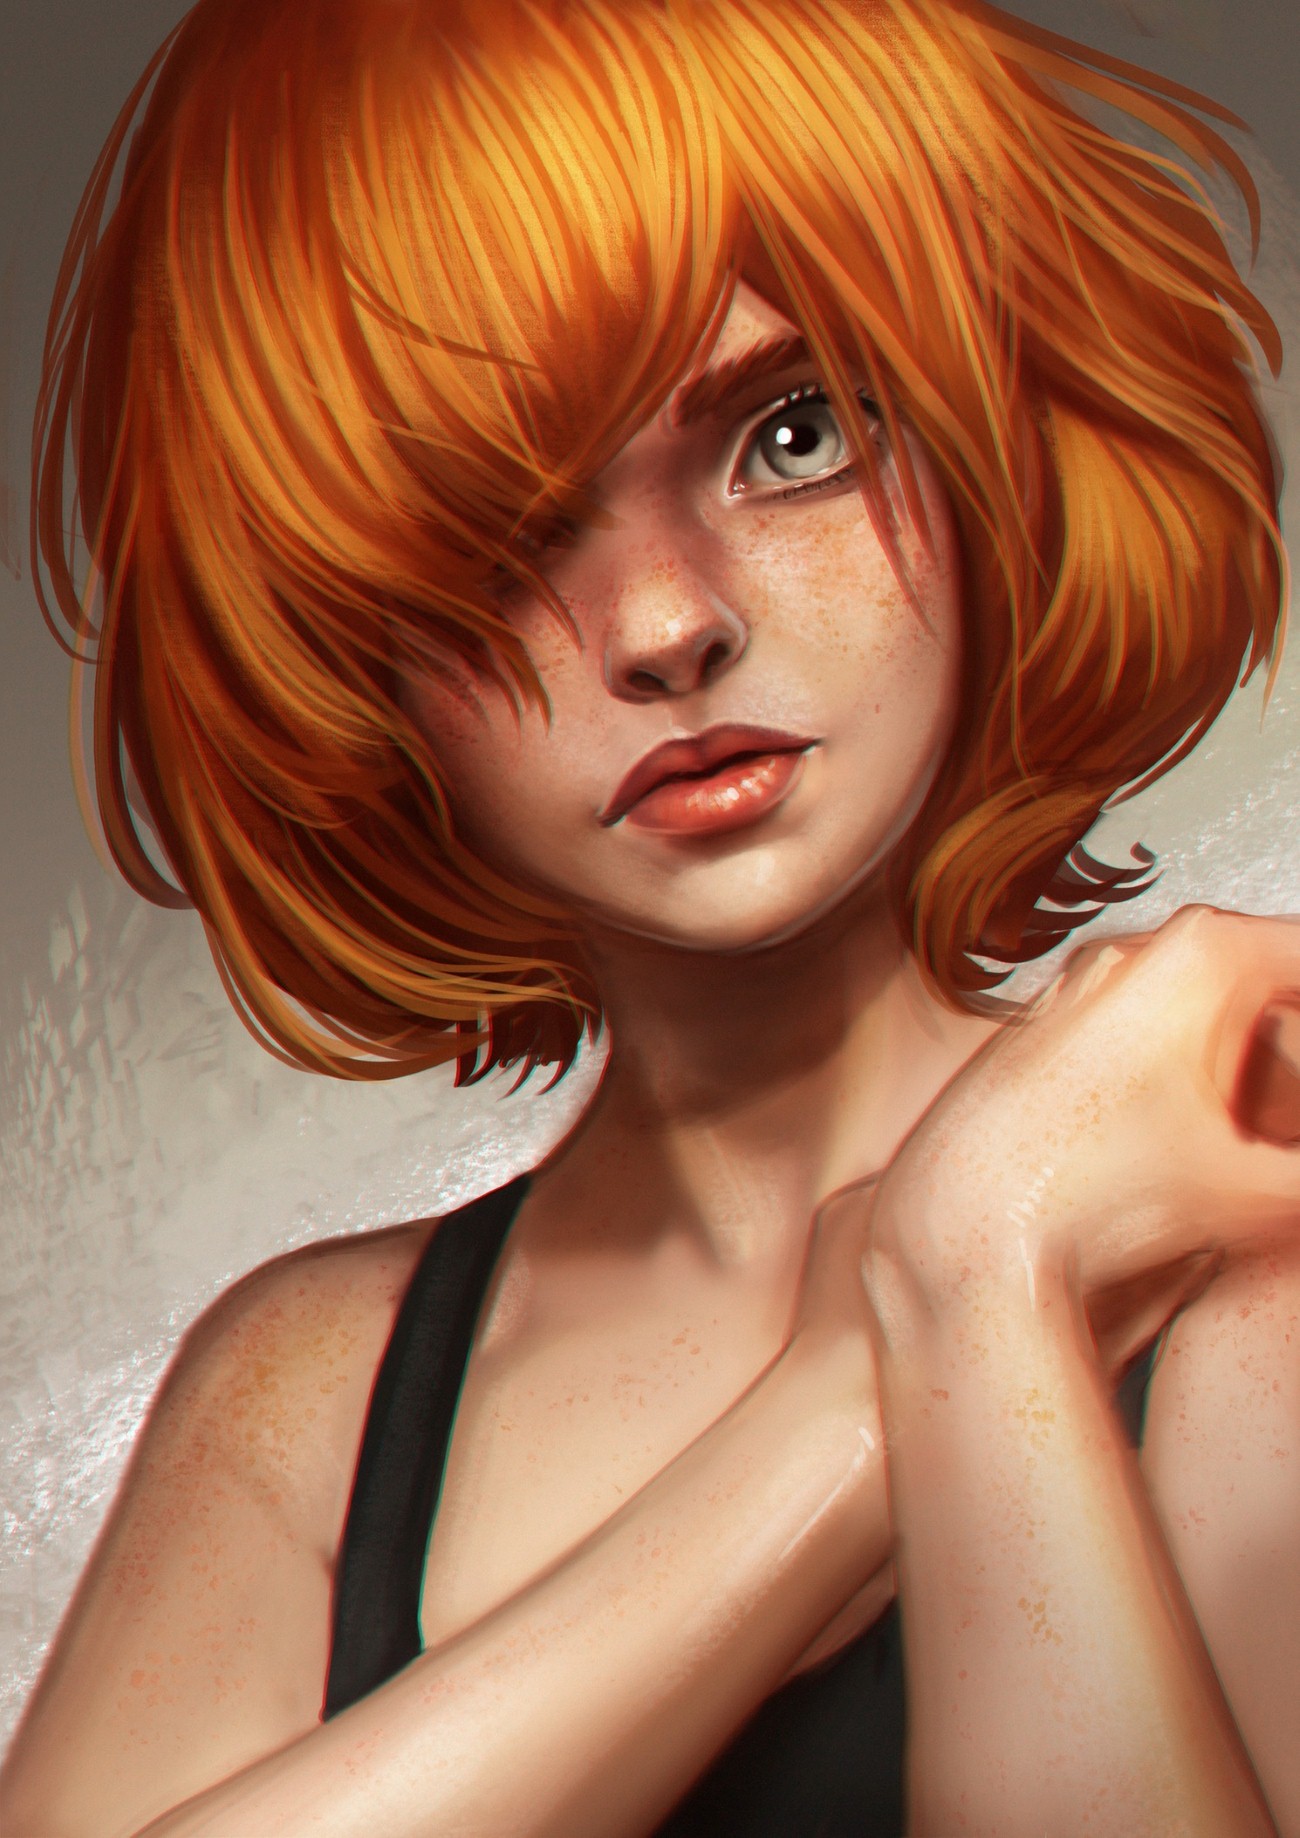 Digital Painting Inspiration #011 - Paintable